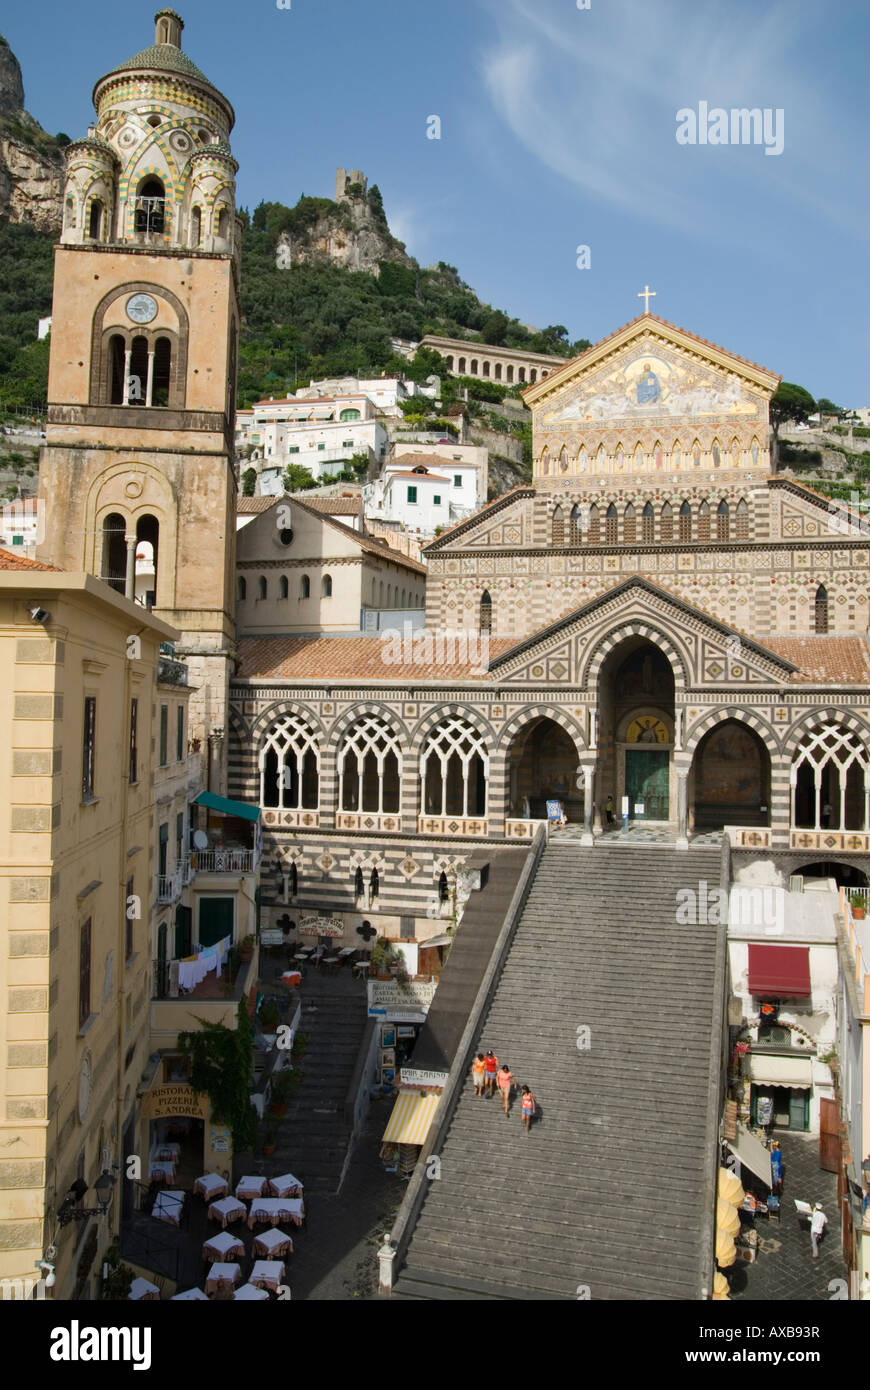 Tourists on the steps below Saint Andrew's Cathedral and bell tower in the town of Amalfi, Campania, Italy Stock Photo